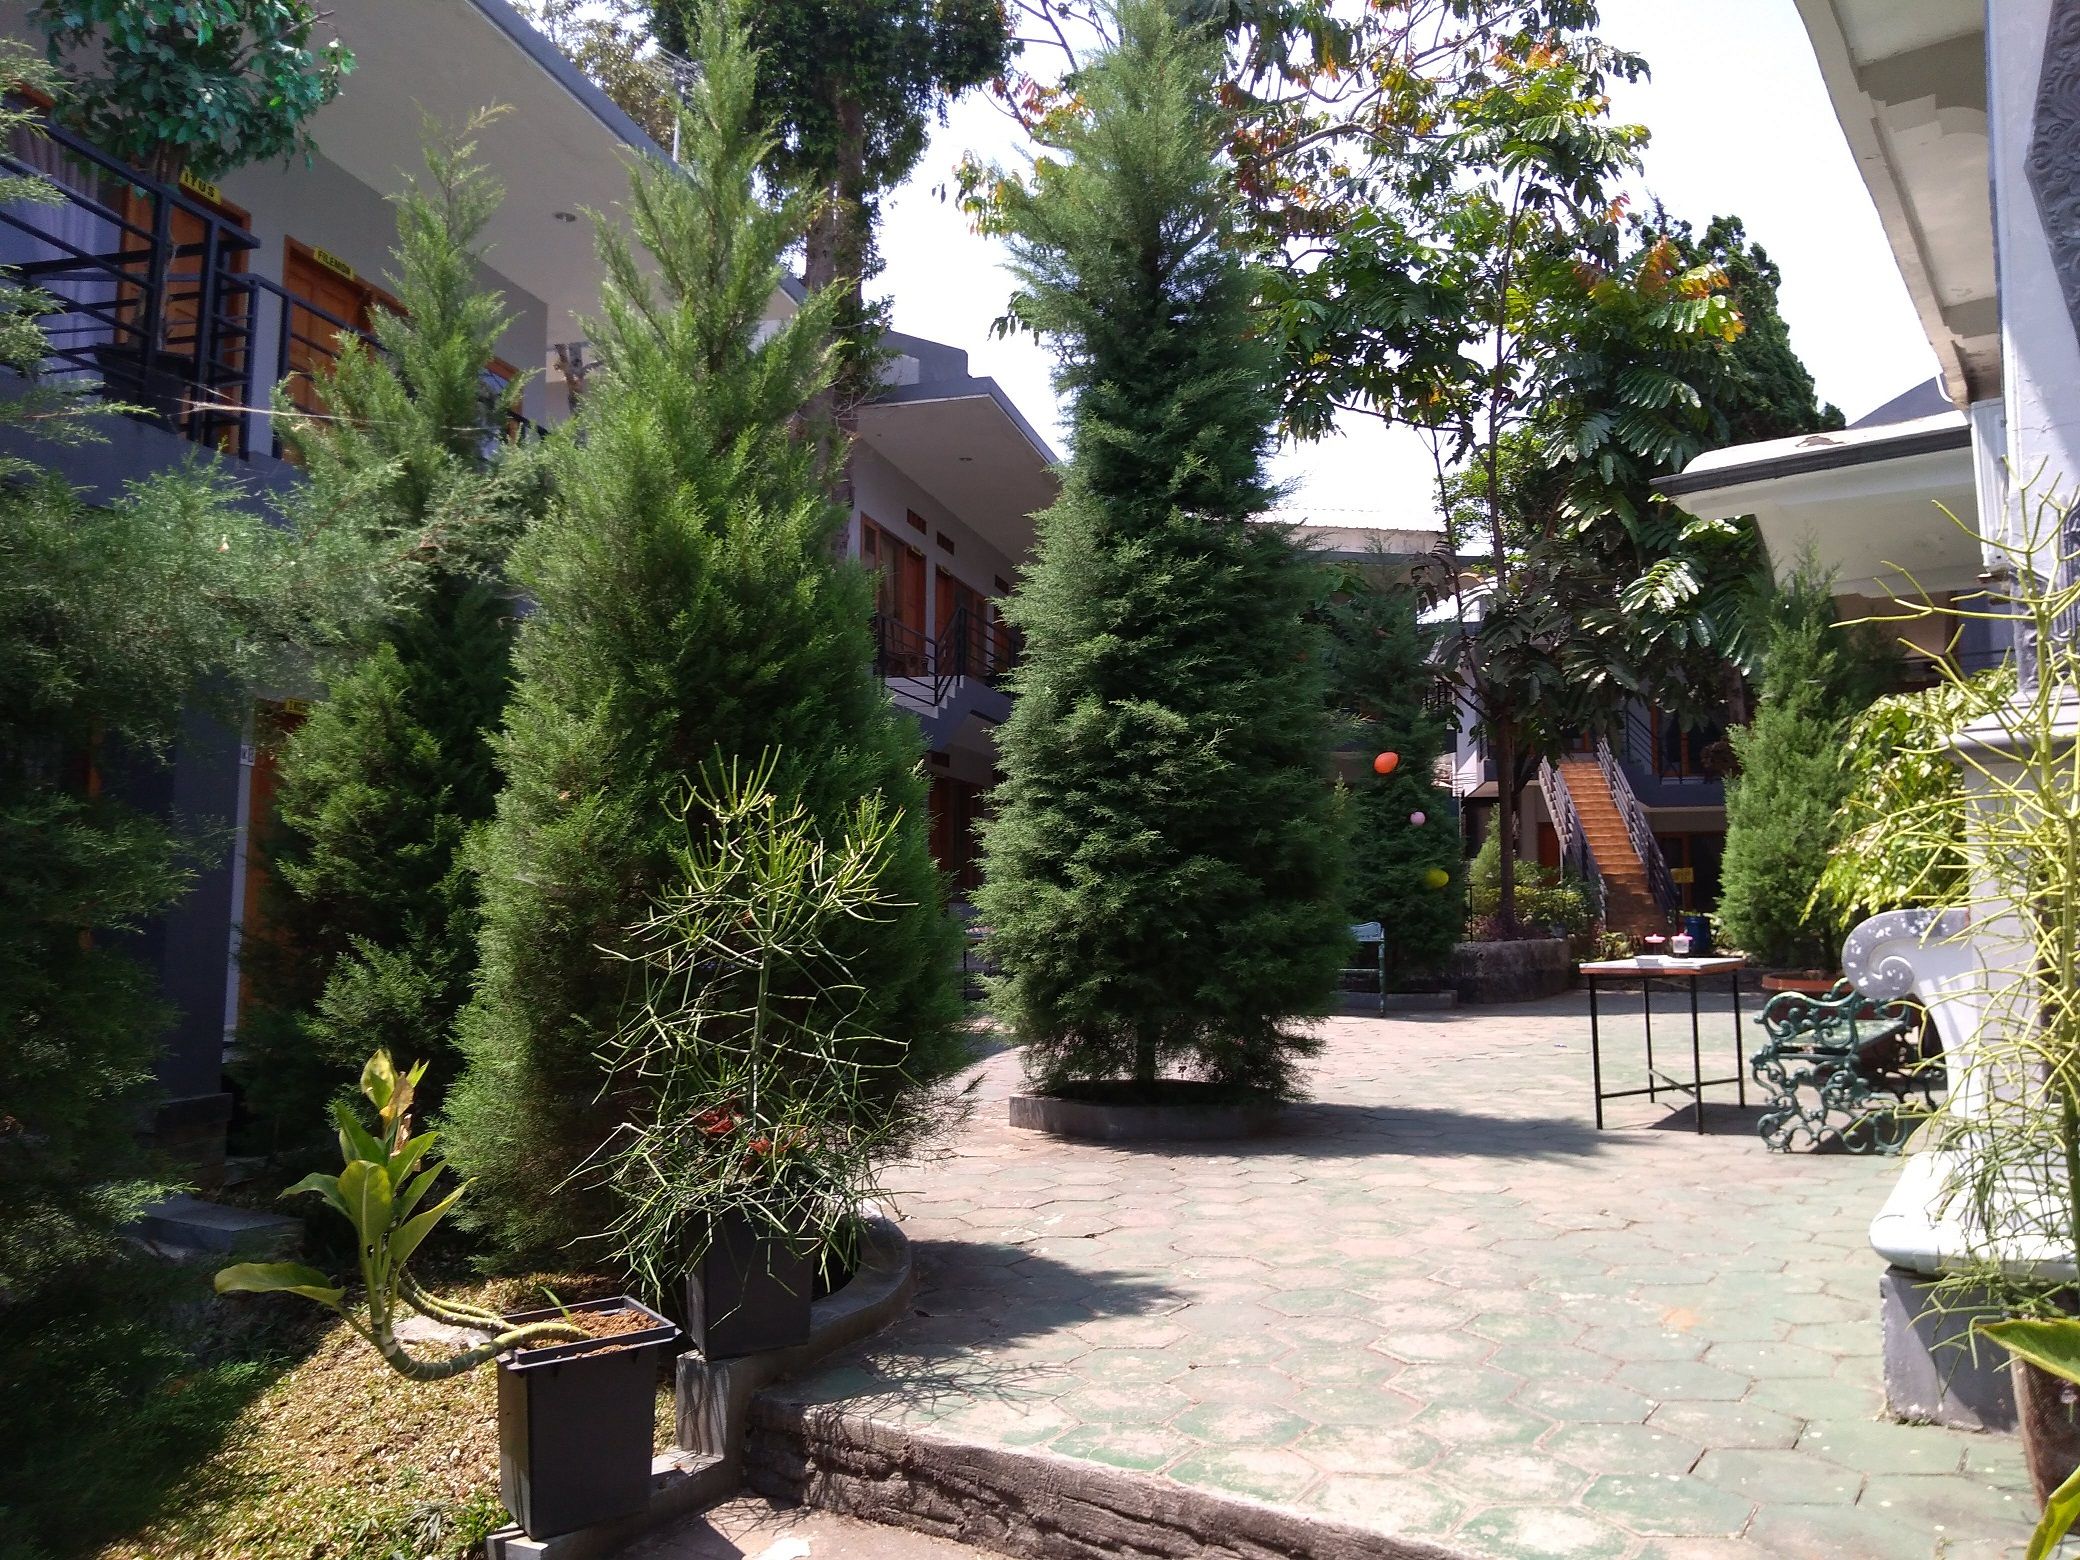 Clean front rooms and lots of trees. dok pribadi